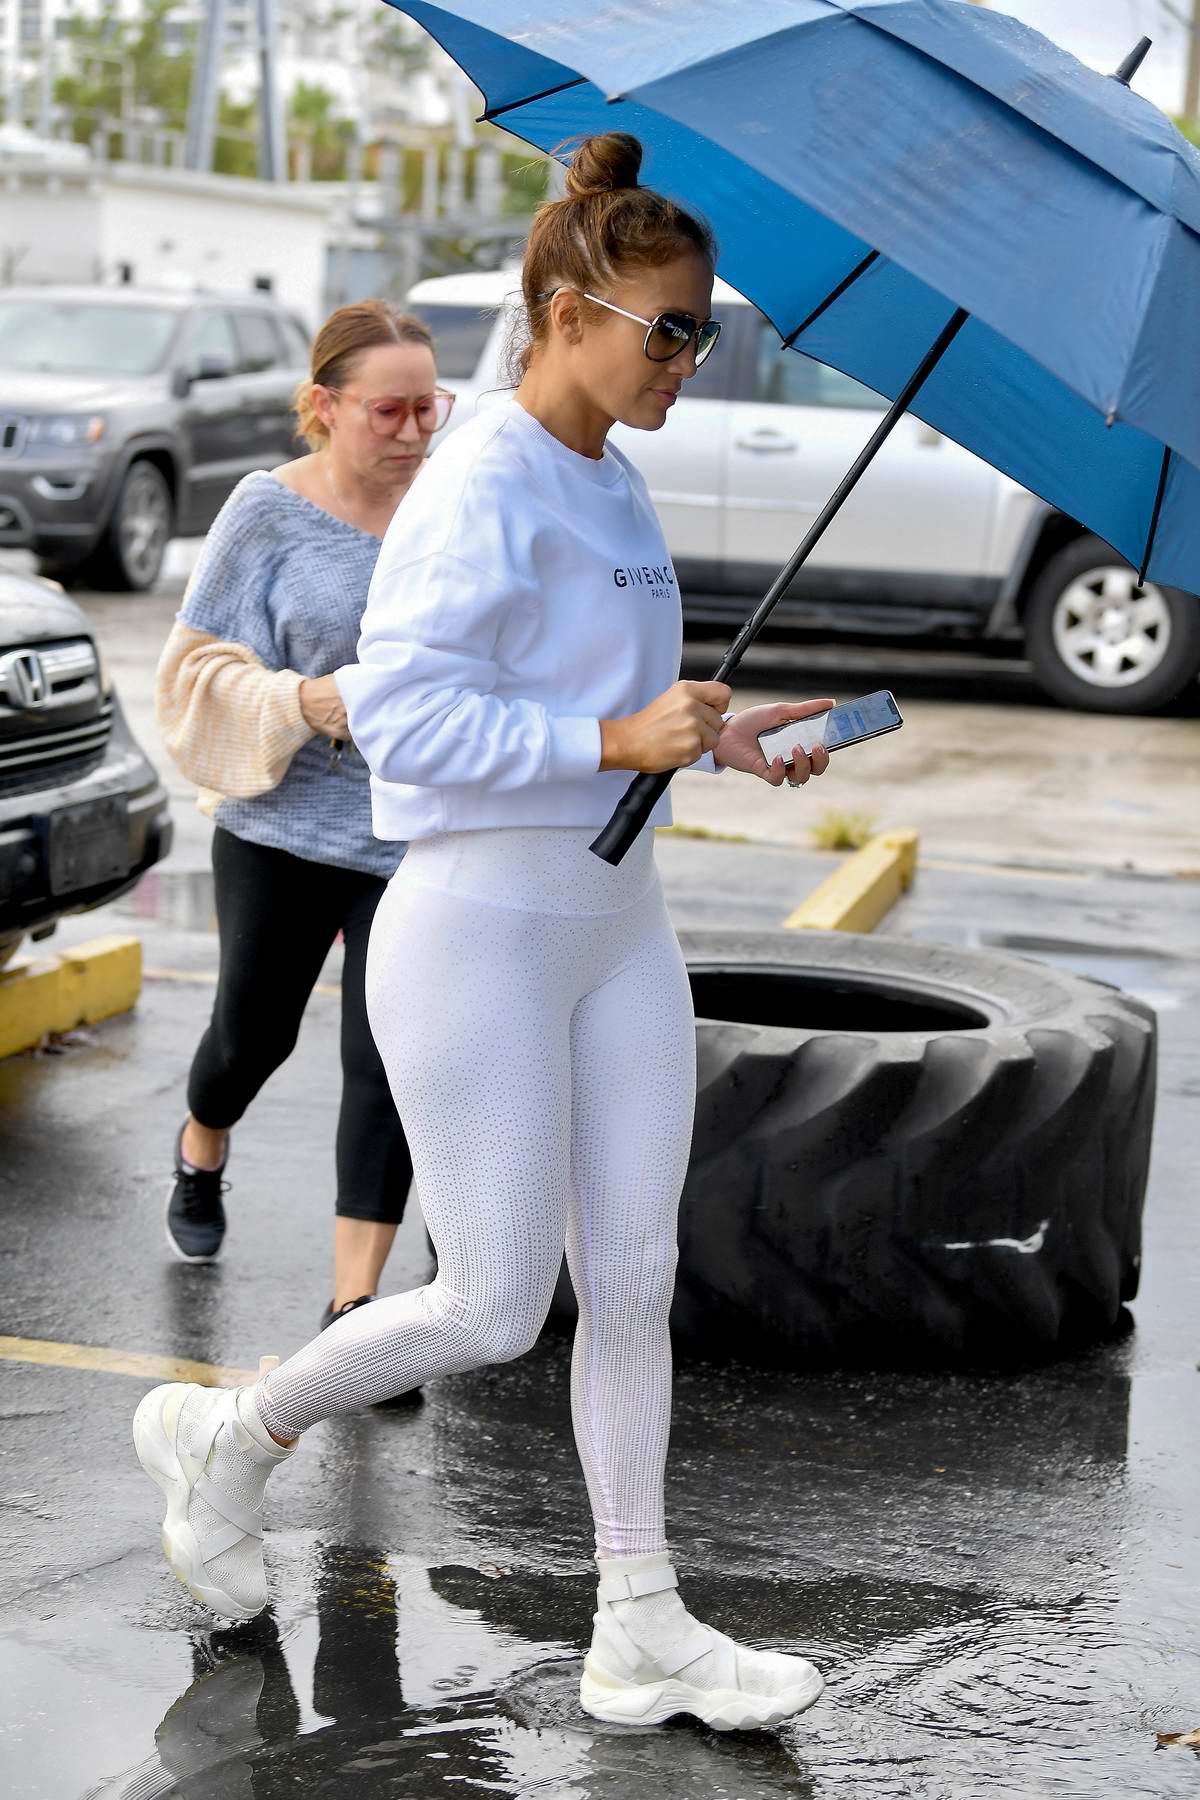 https://www.celebsfirst.com/wp-content/uploads/2019/12/jennifer-lopez-sports-all-white-as-she-arrives-at-the-gym-in-miami-florida-261219_1.jpg